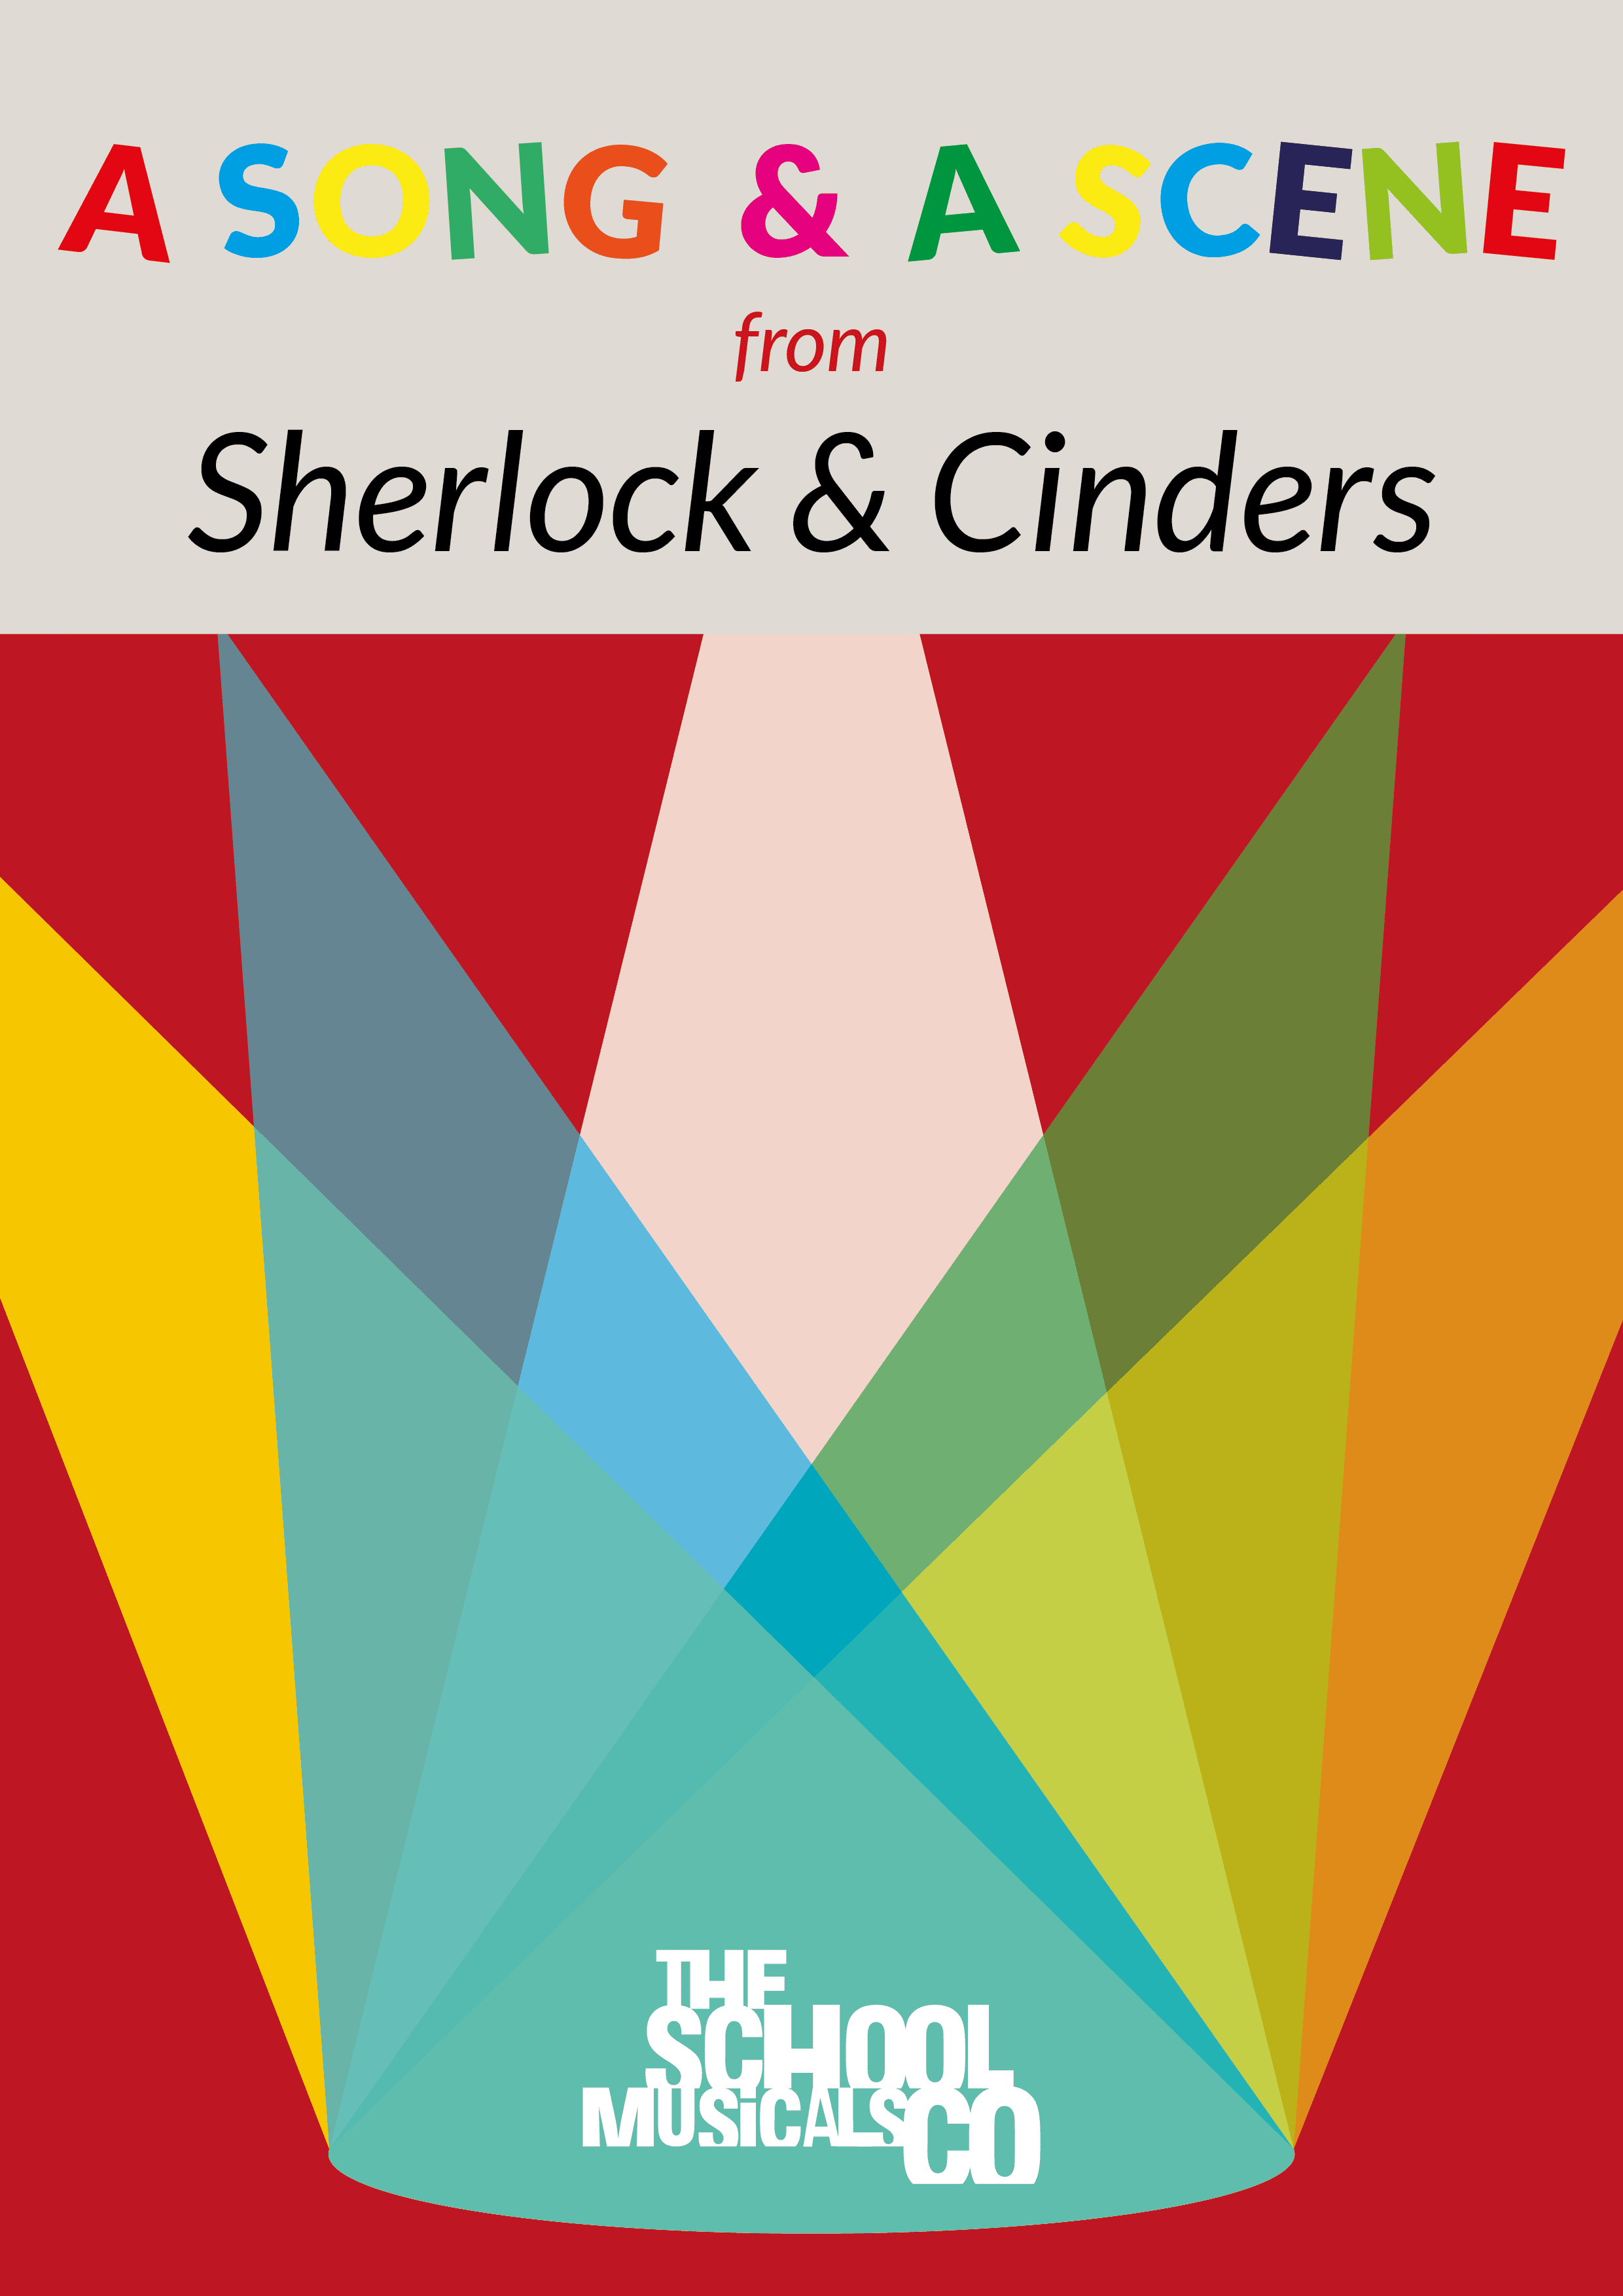 A Song & A Scene from Sherlock & Cinders